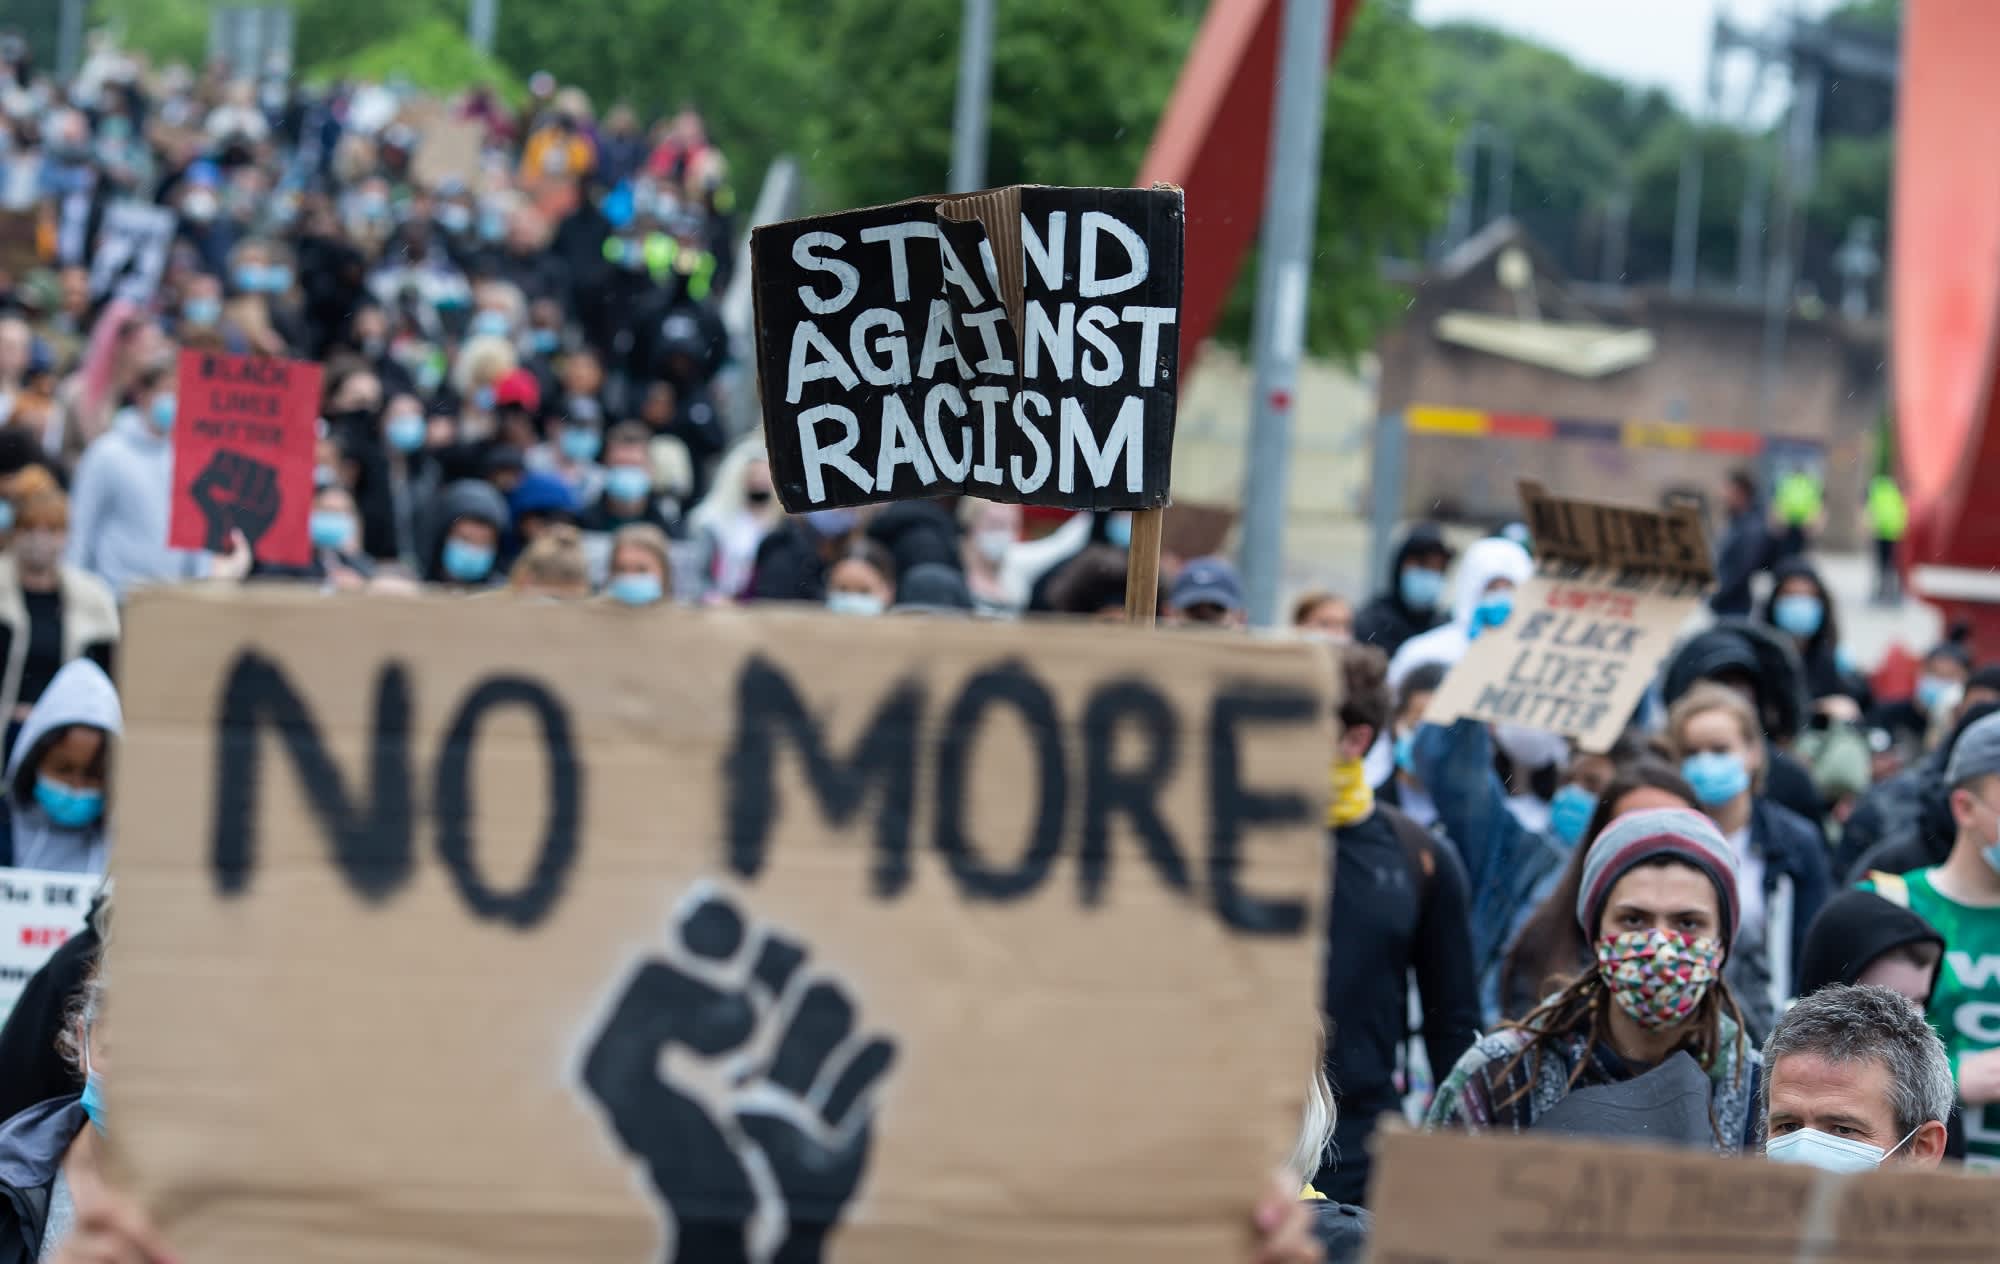 Existence of racism | Essay Freelance Writers